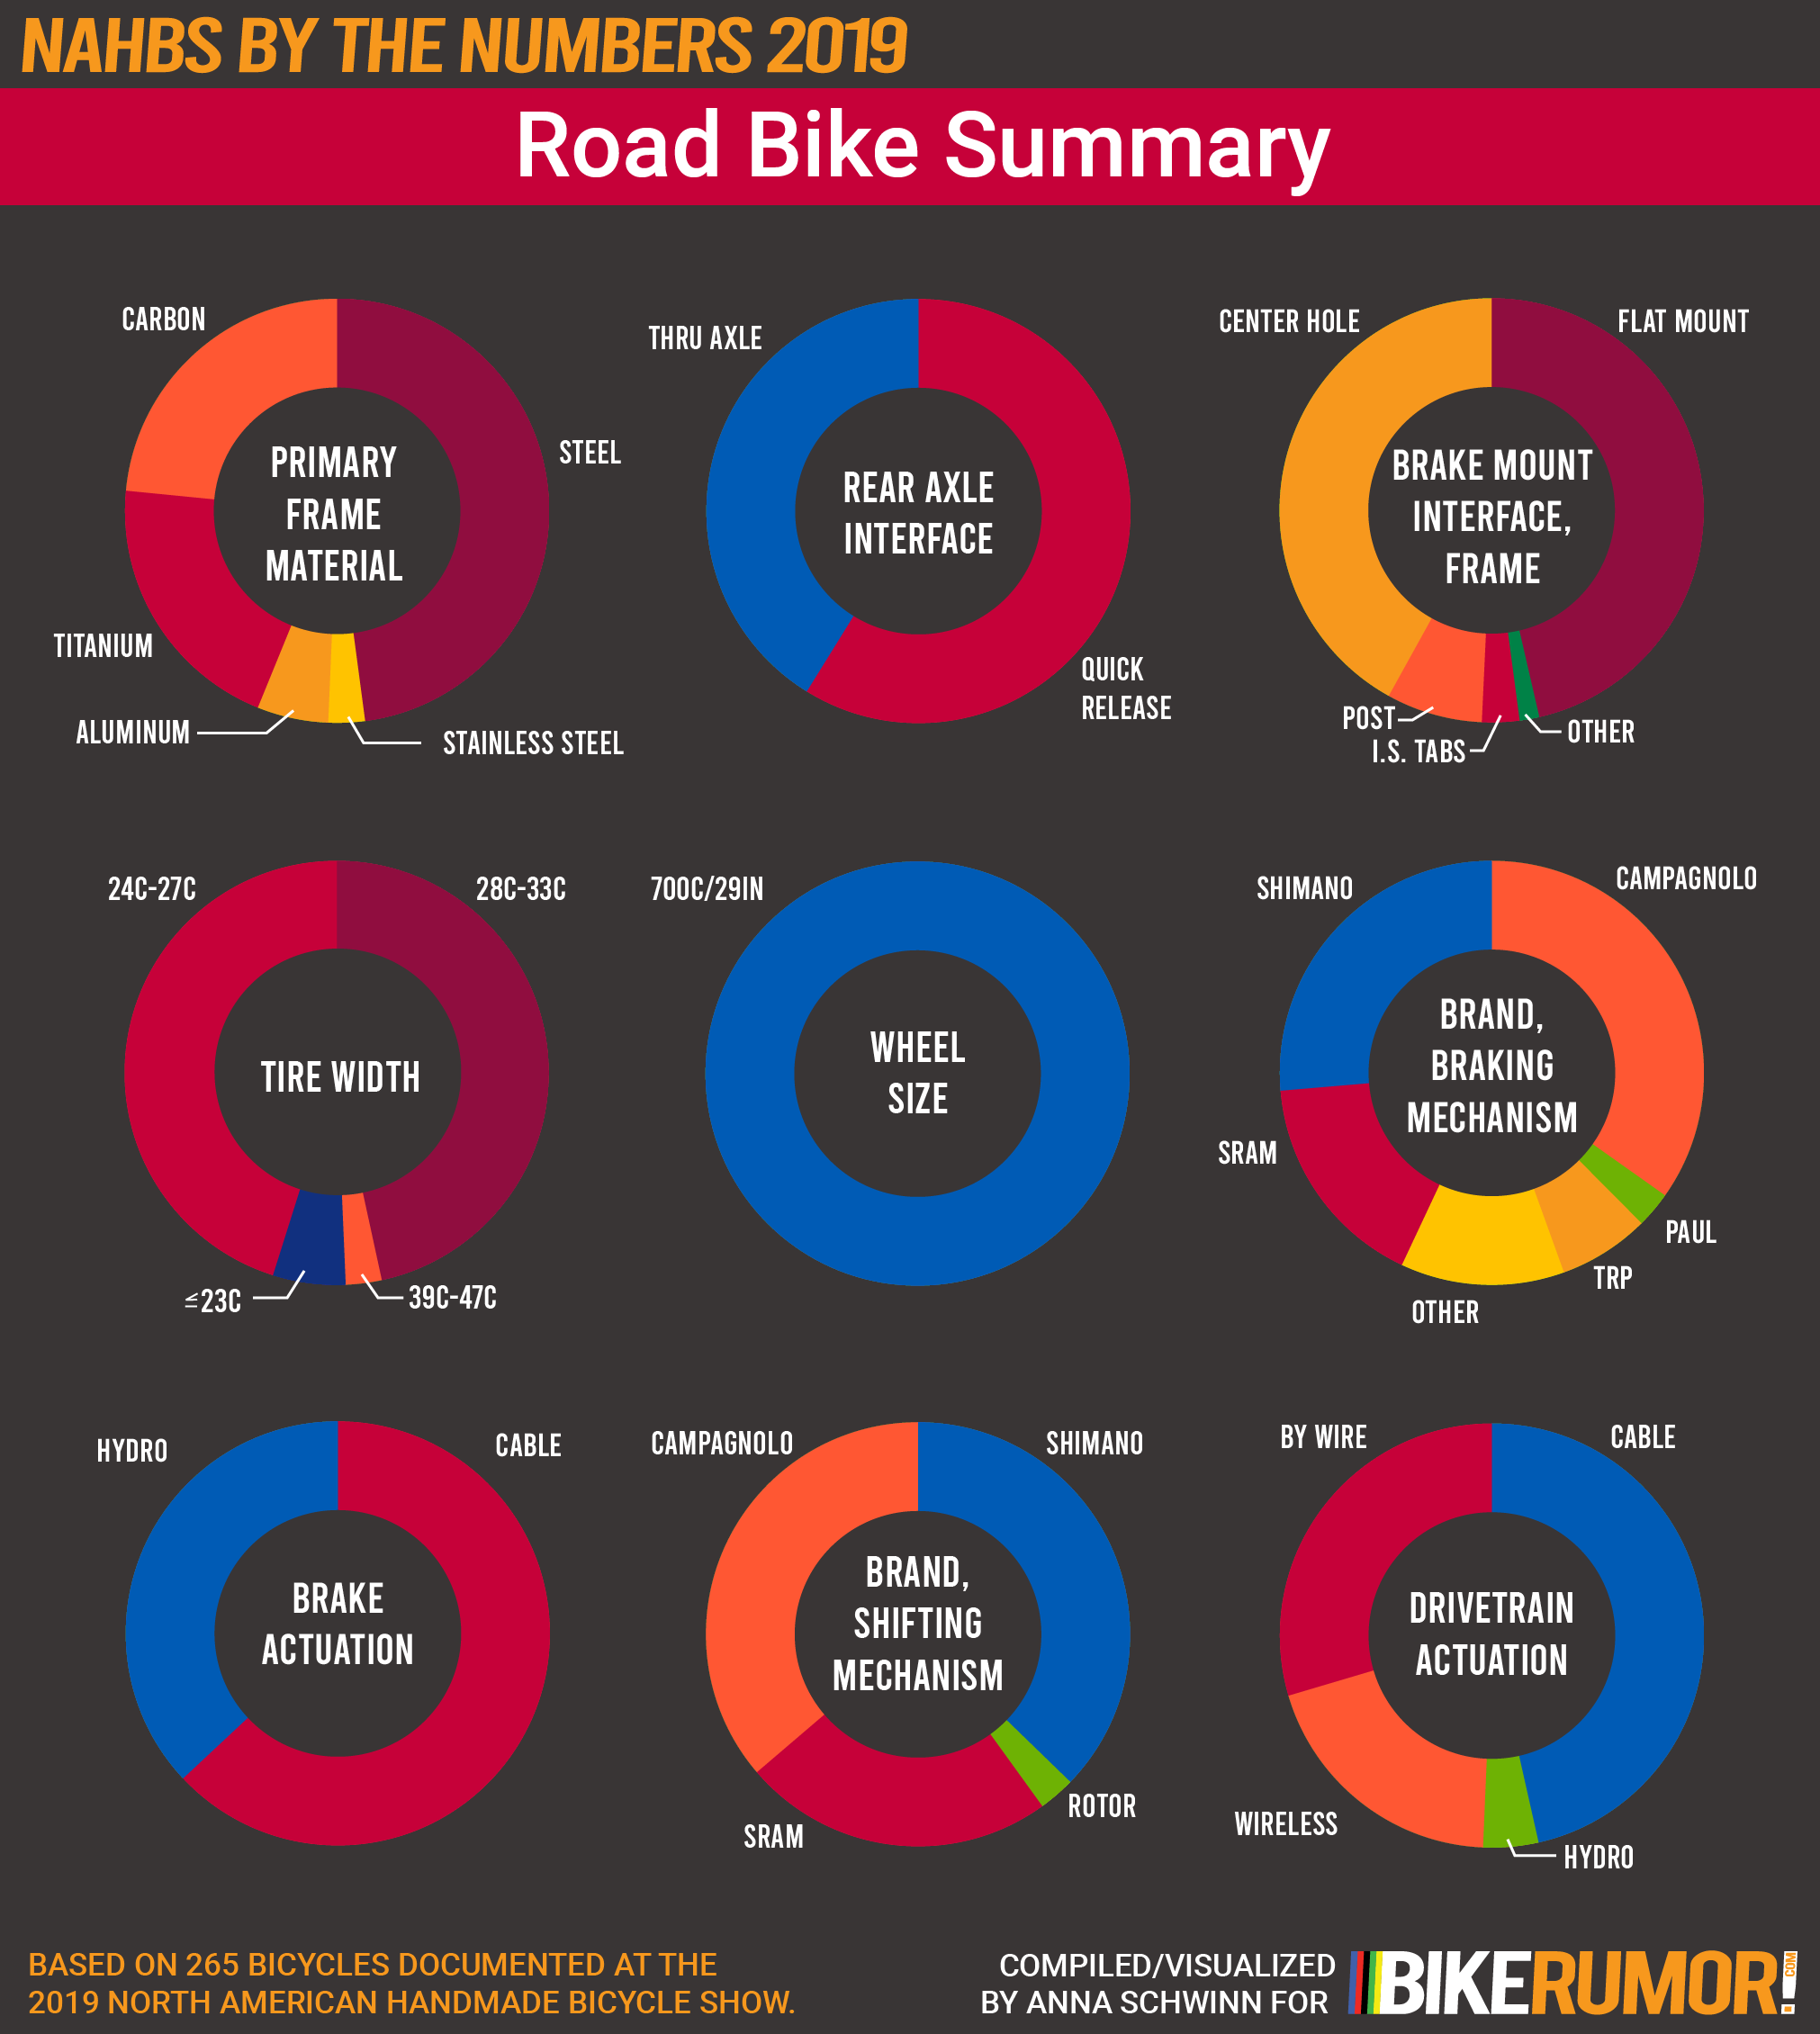 NAHBS by the Numbers 2019, Analysis by Discipline Category, Road Bike Summary